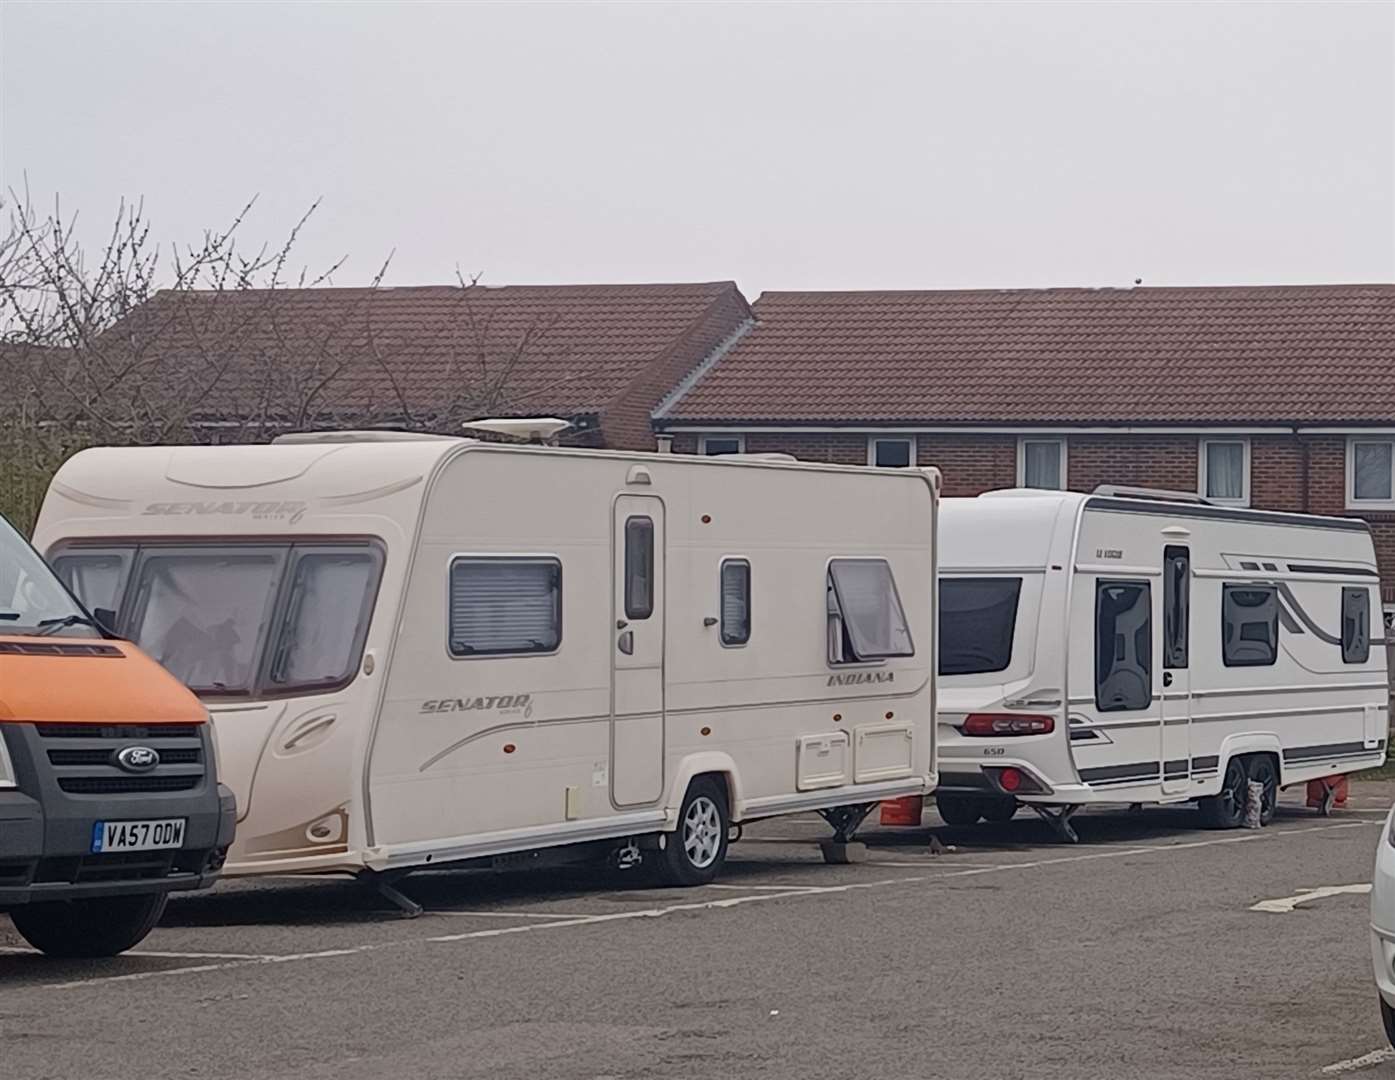 Some of the caravans in the car park off the A2 at Rainham